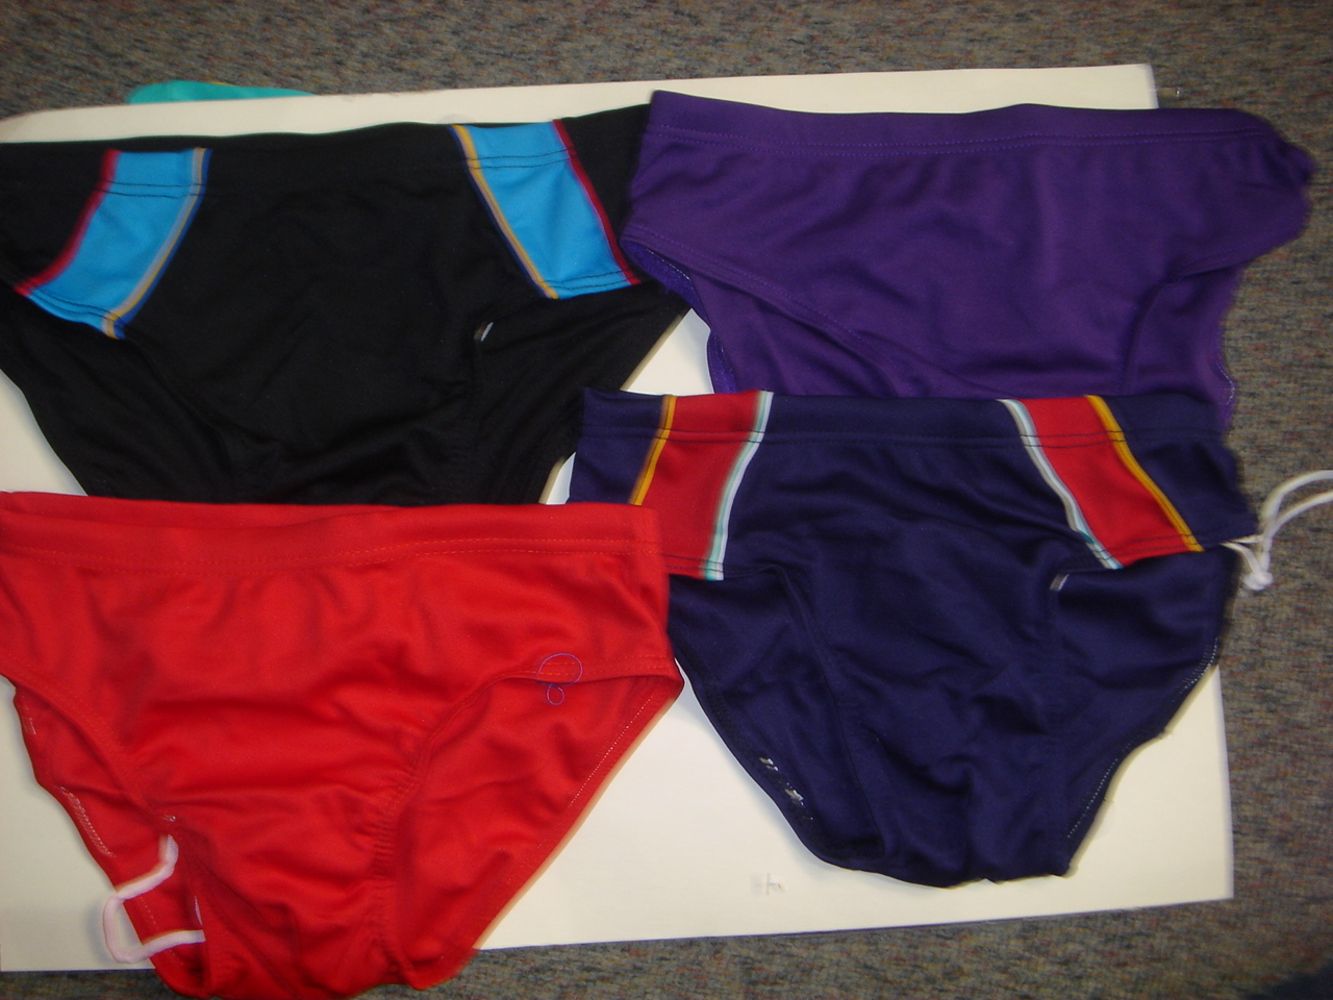 Swimwear Auction | Lots Include: Mens, Womens & Childrens Options | Bulk Lots | Ends 08 July 2021